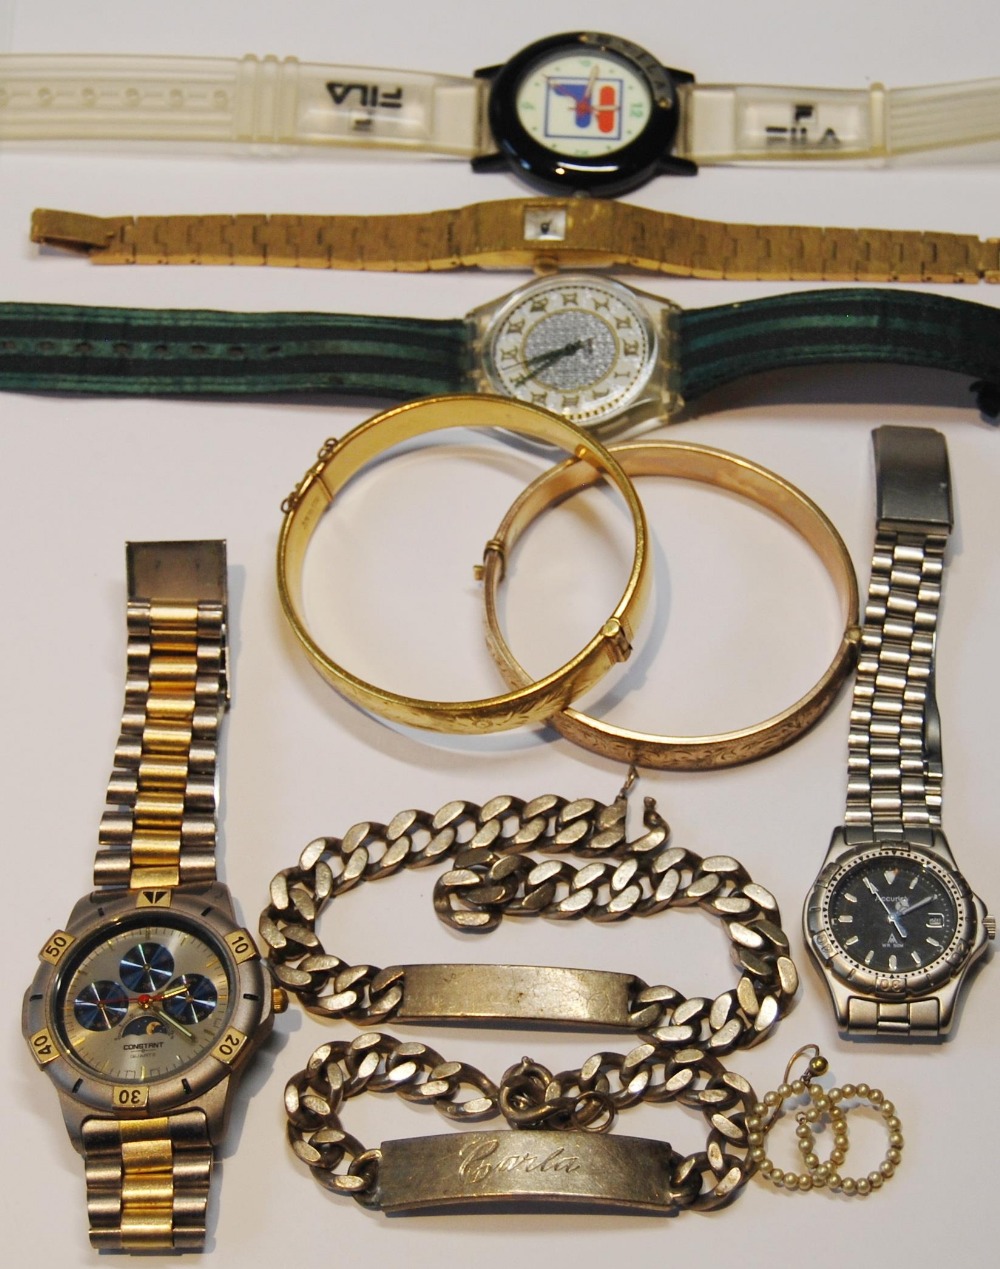 Two silver bracelets, two bangles, five watches and various other items.